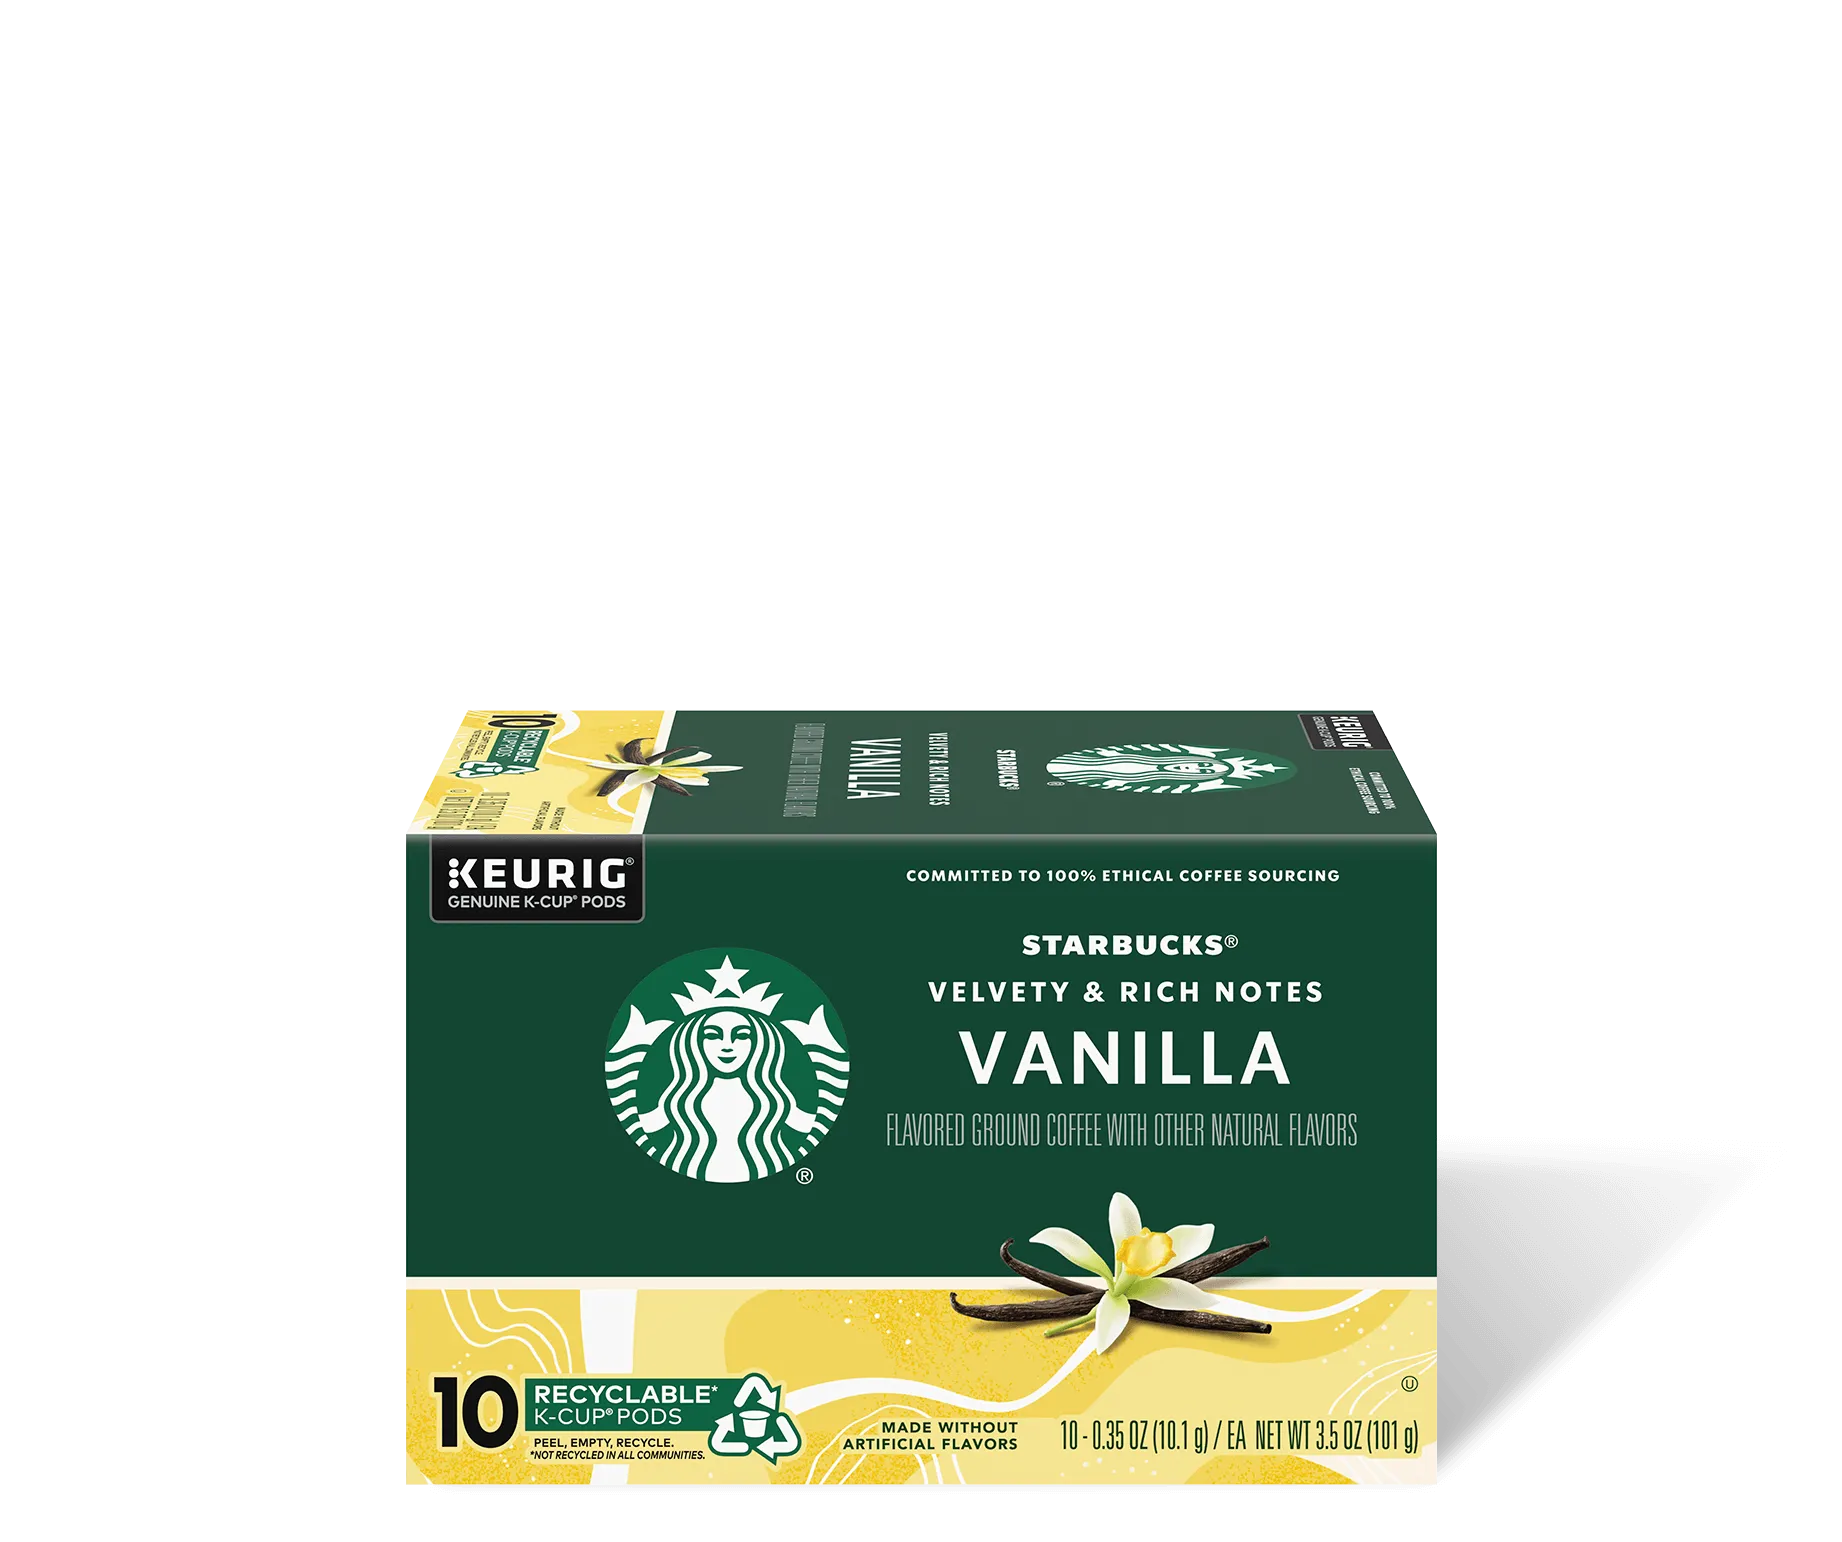 Starbucks Coffee Company Holiday Limited Edition Gingerbread Coffee K Cups Pods - 22 Count - 1 Box